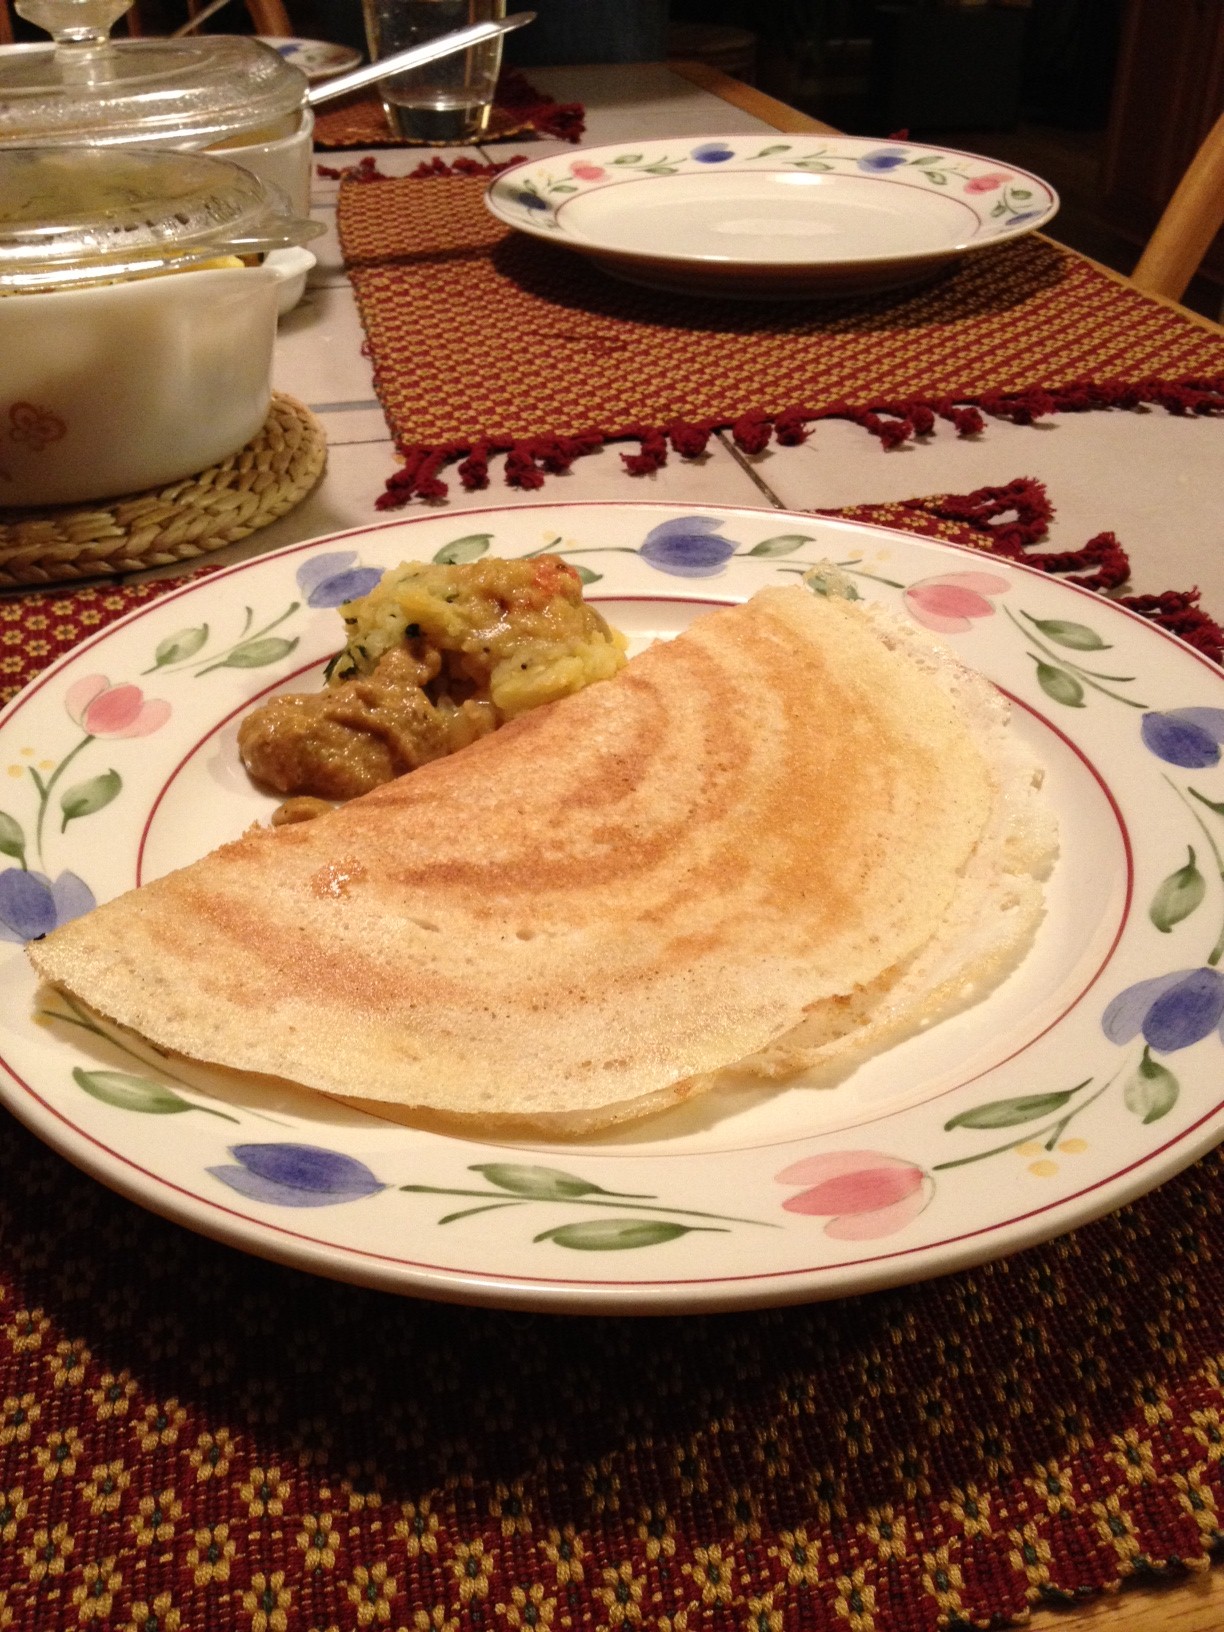 Dosas (from scratch!): Fermented Lentil and Rice Crepes